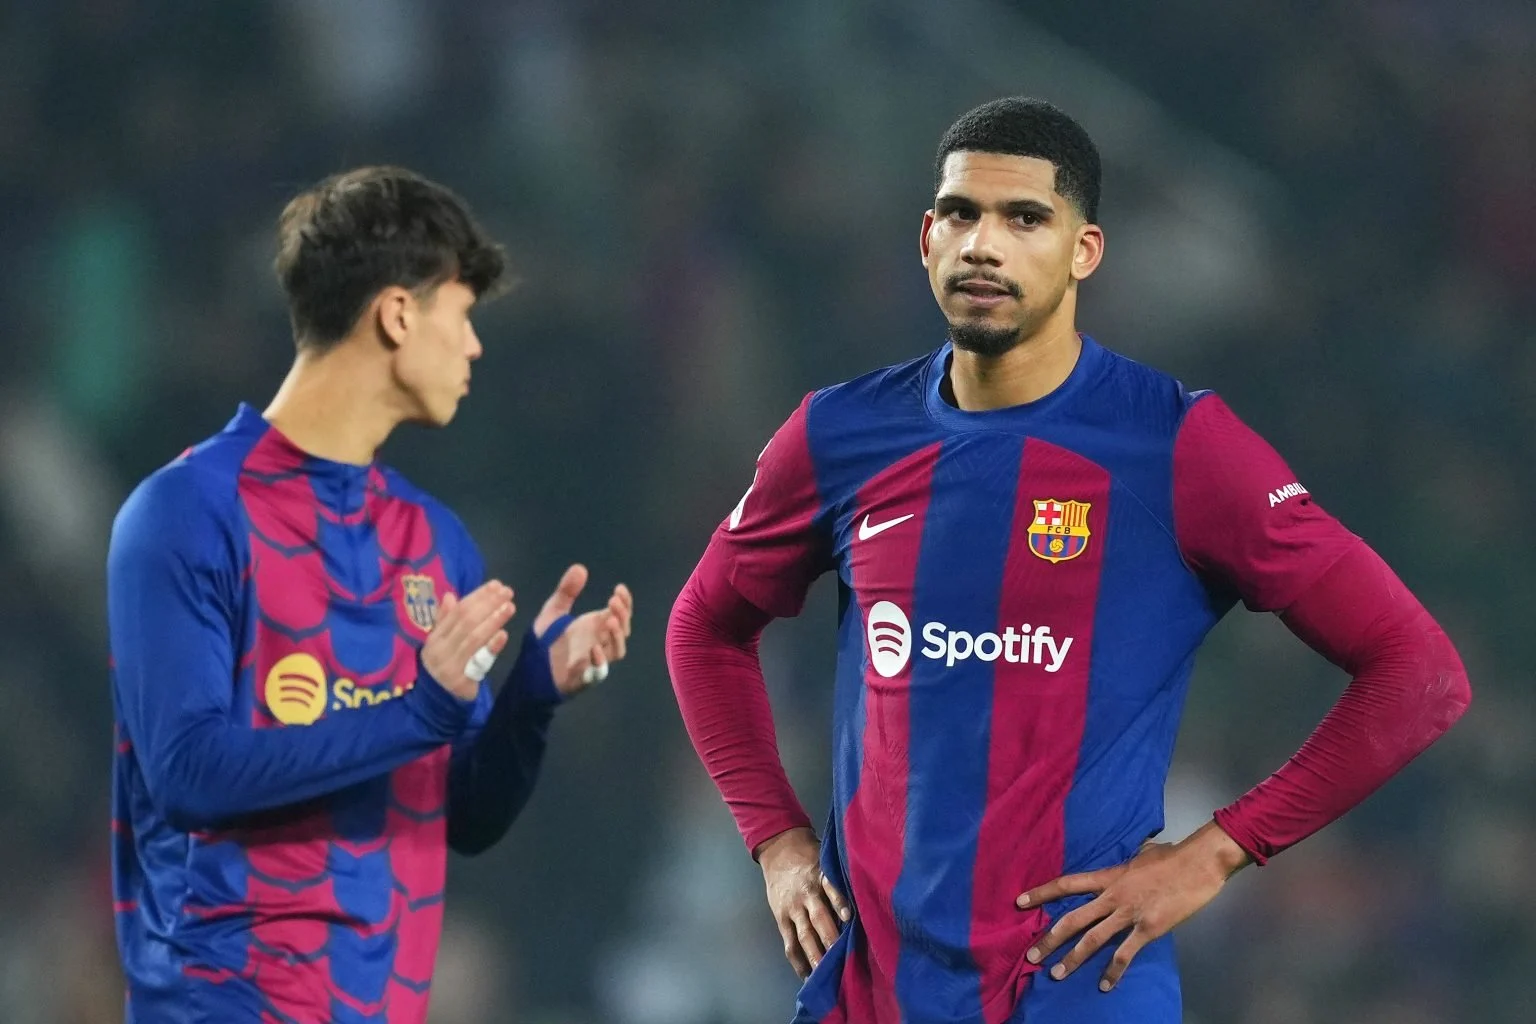 Barcelona key defender suffering from discomfort ahead of PSG encounter